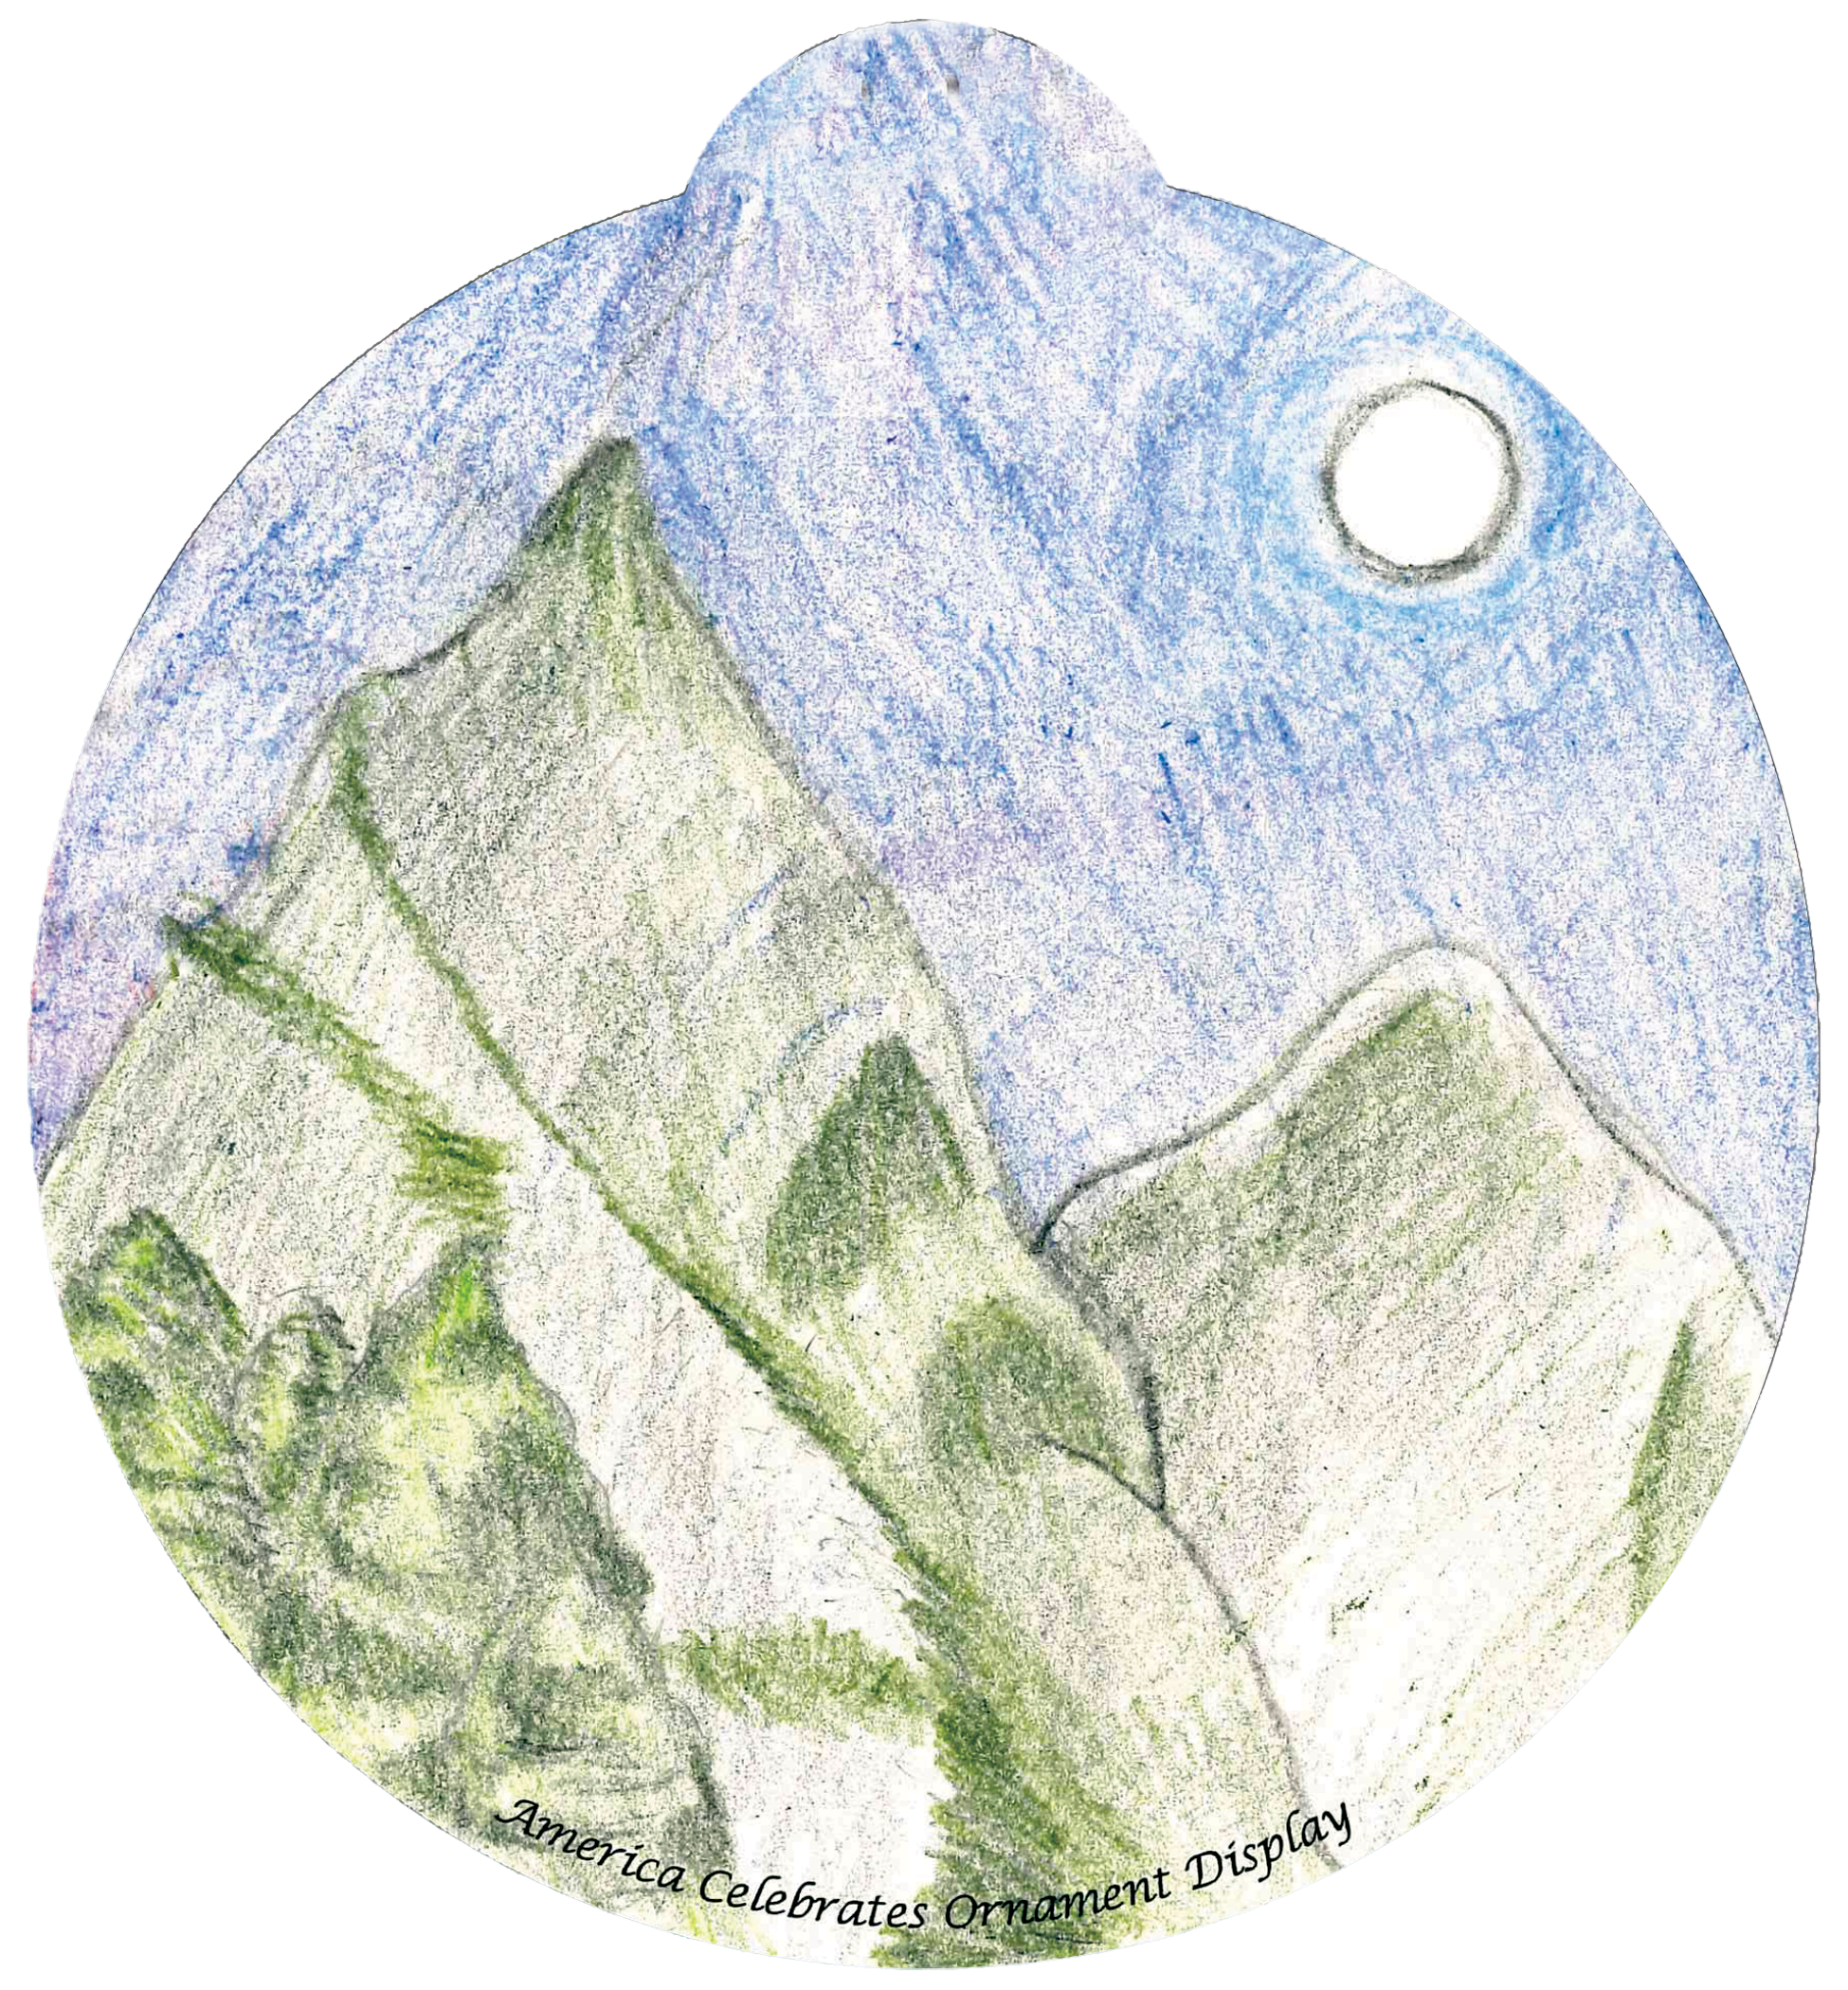 ornament depicting mountains in moonlight